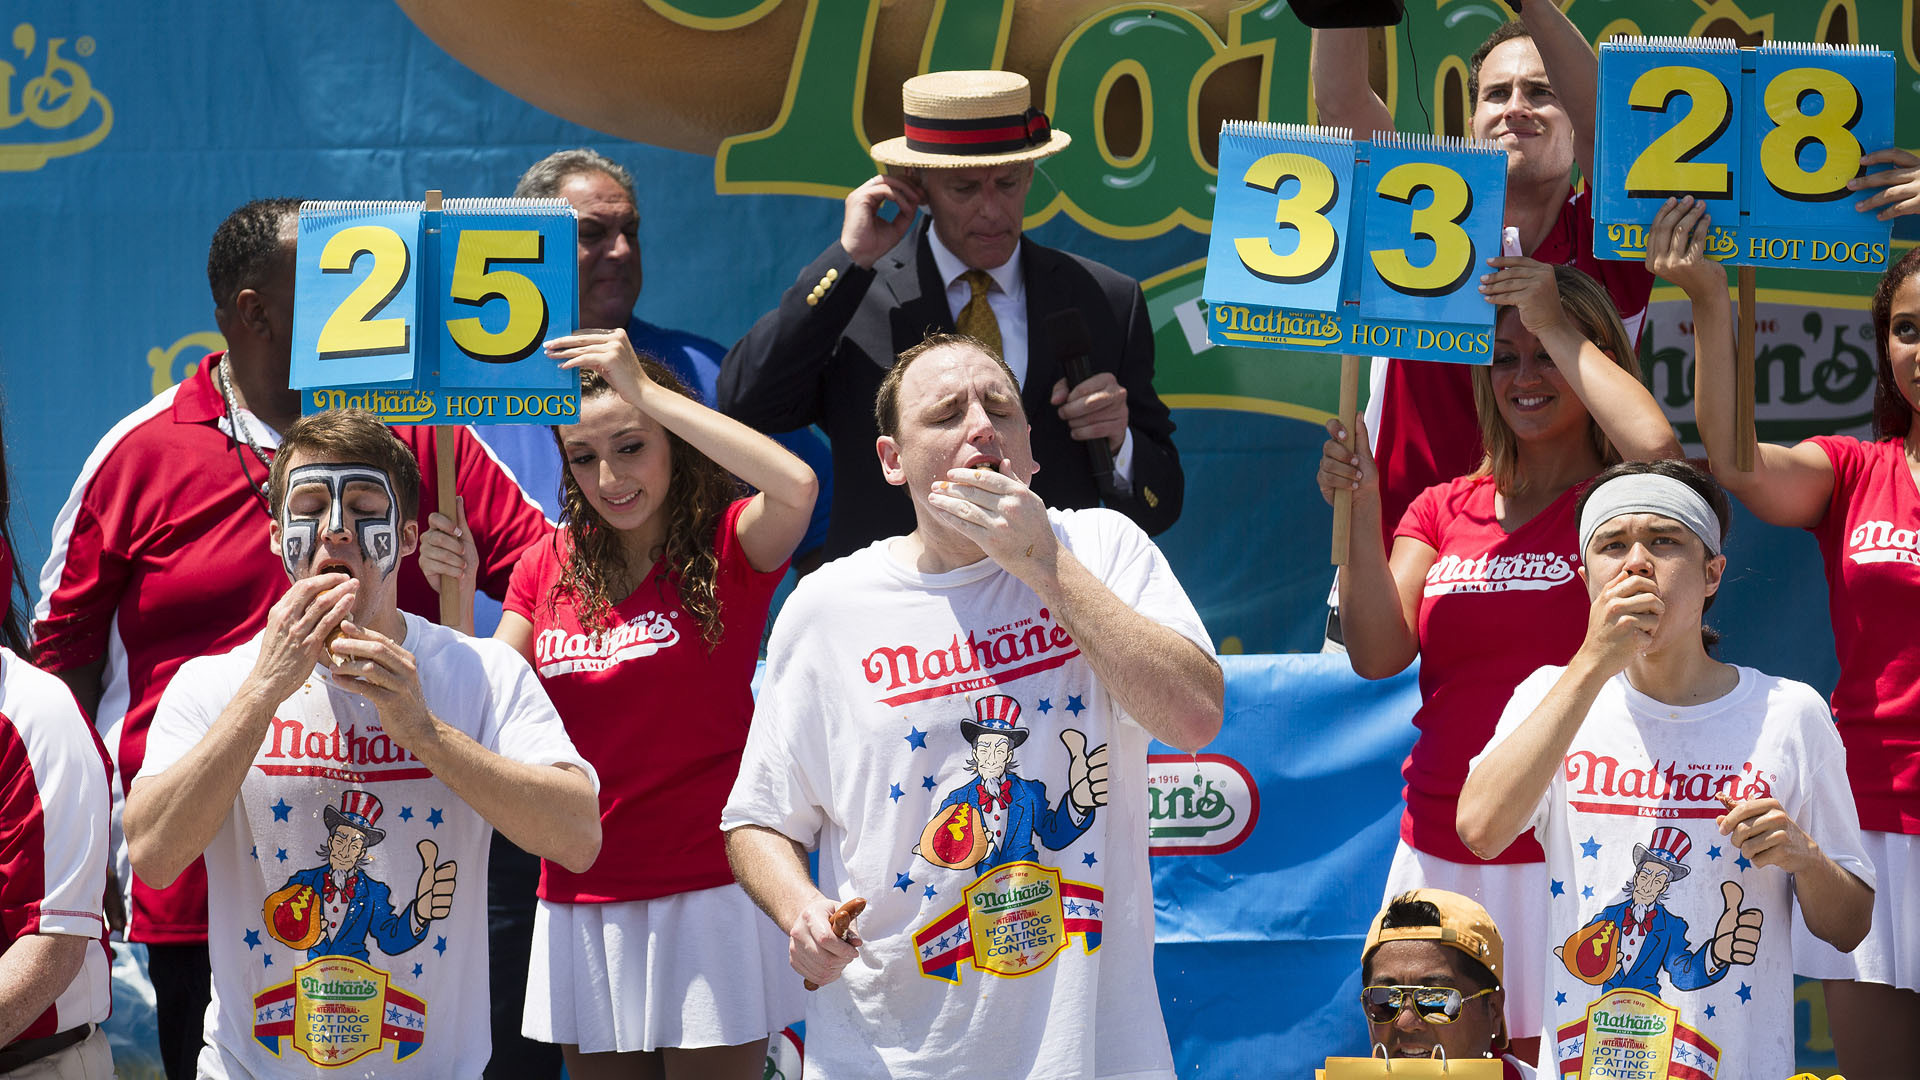 Hot Dog Eating Contest rules, explained: Time limits, vomiting & more ...